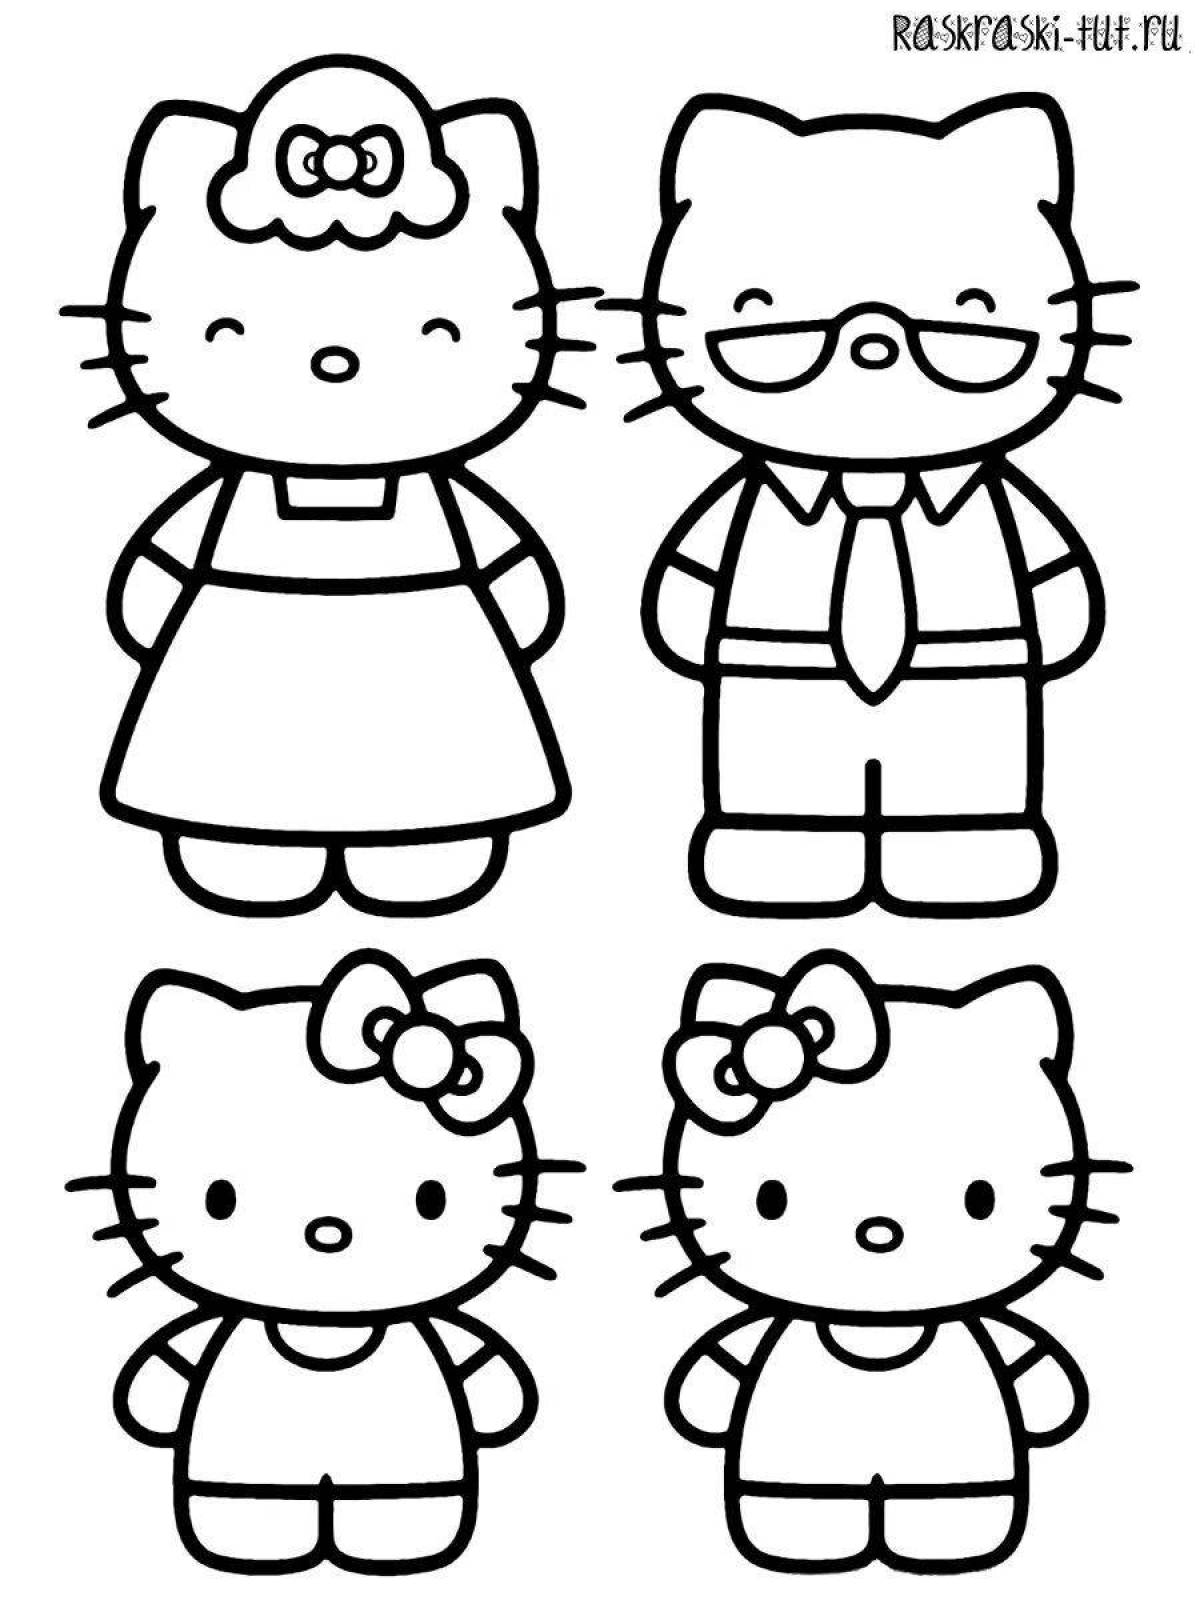 Awesome hello kitty doll coloring page